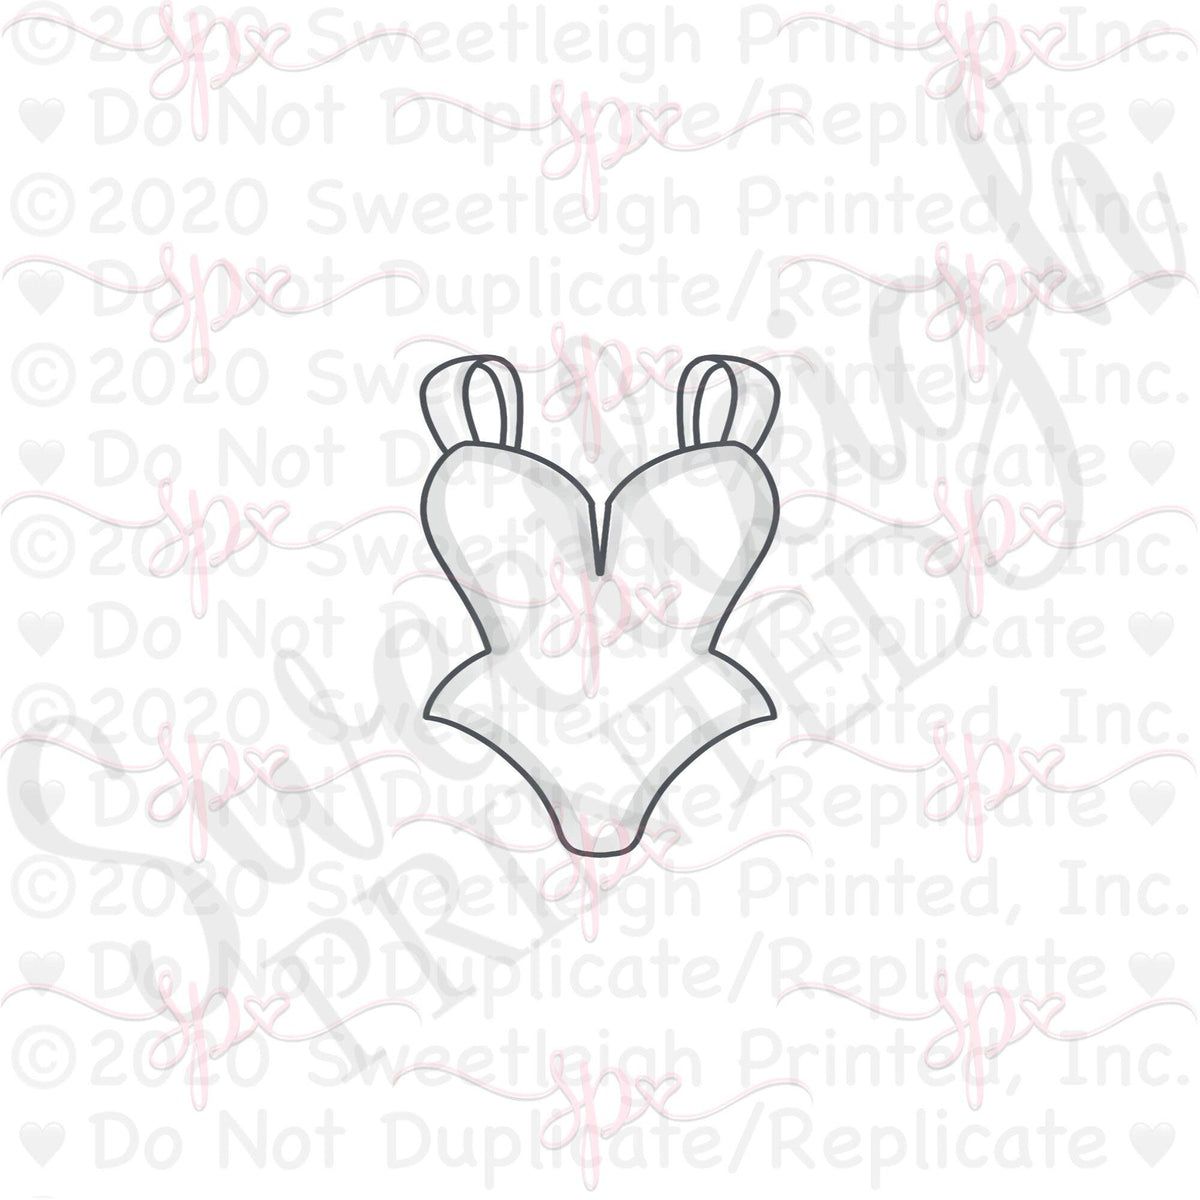 Full Deep V Bathing Suit Cookie Cutter - Sweetleigh 